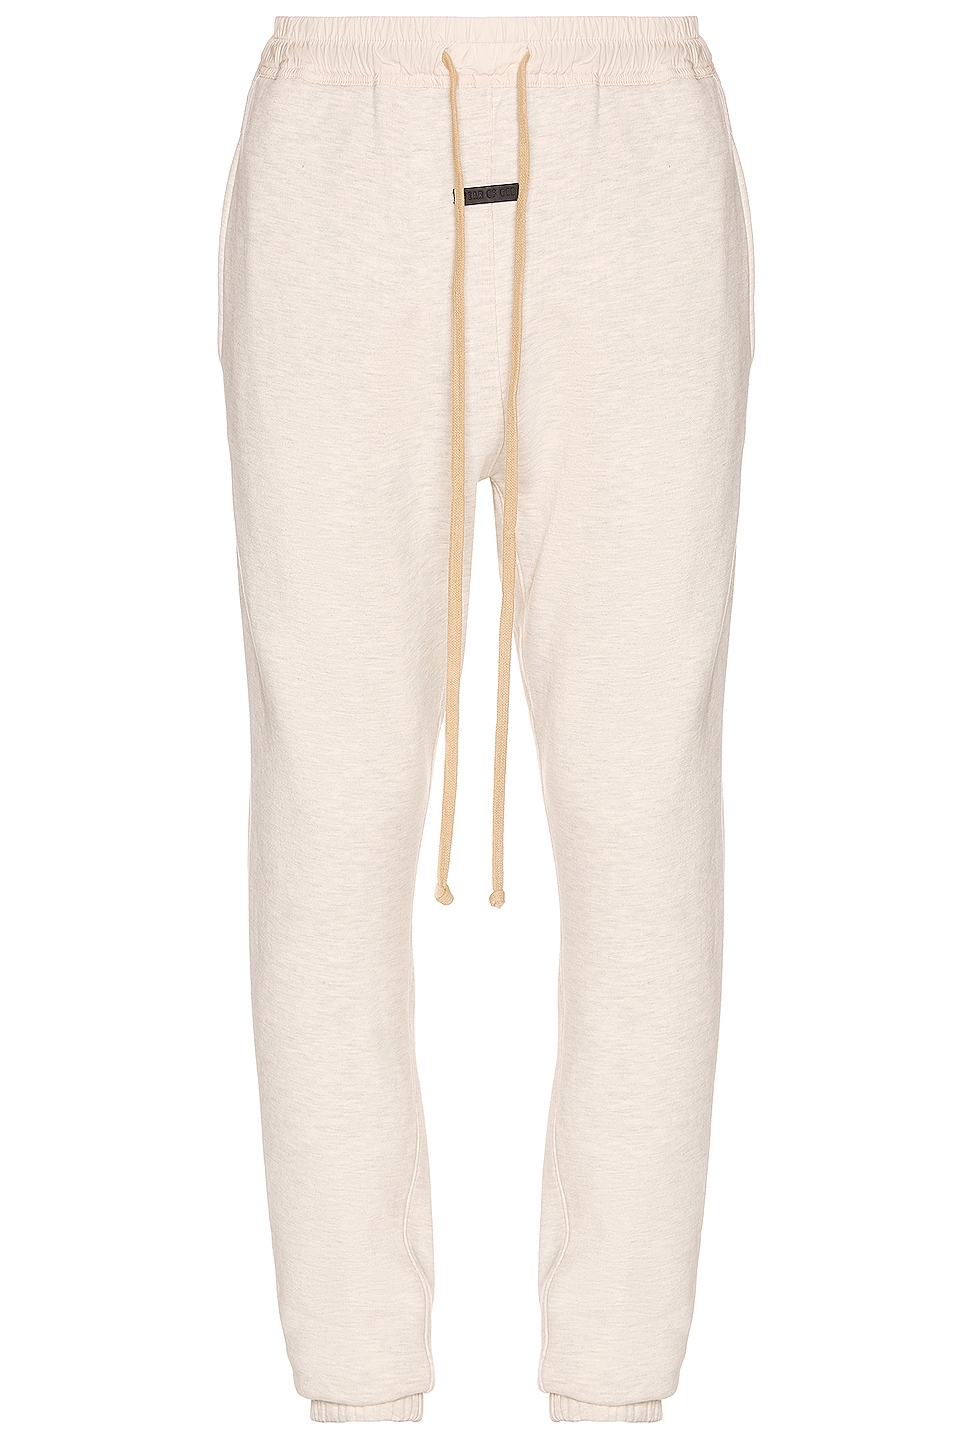 Image 1 of Fear of God Vintage Sweatpant in Cream Heather